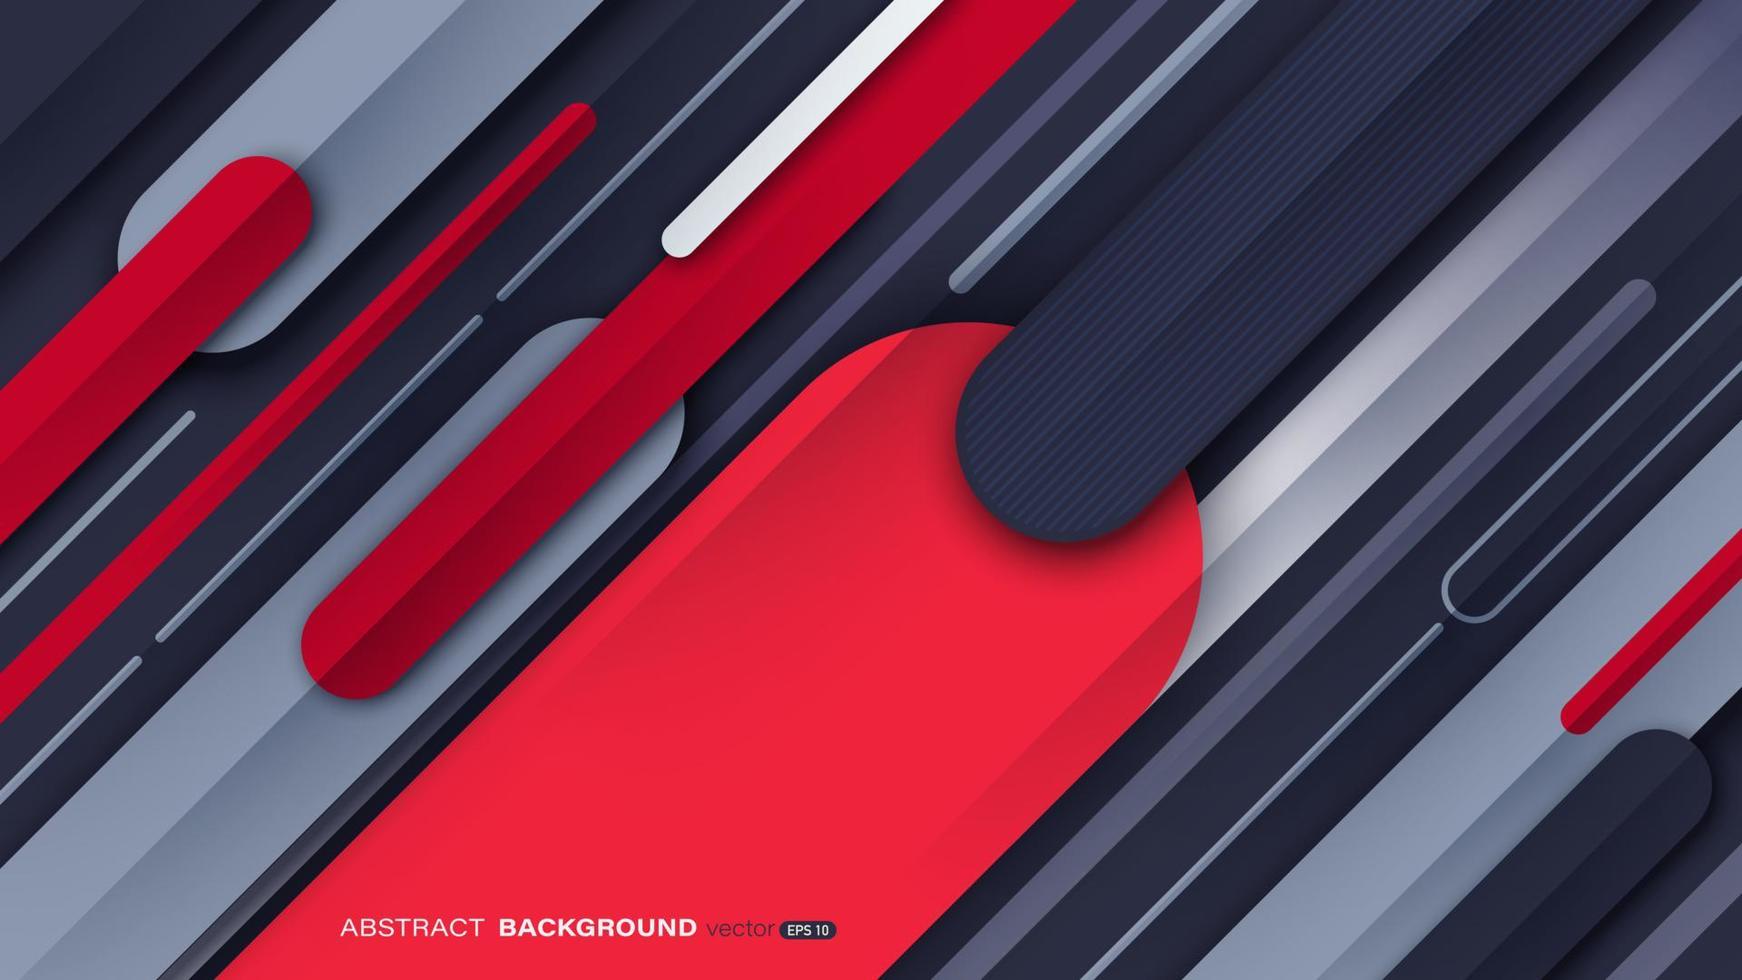 Abstract background decorate with diagonal red and blue geometric shape and shadow vector